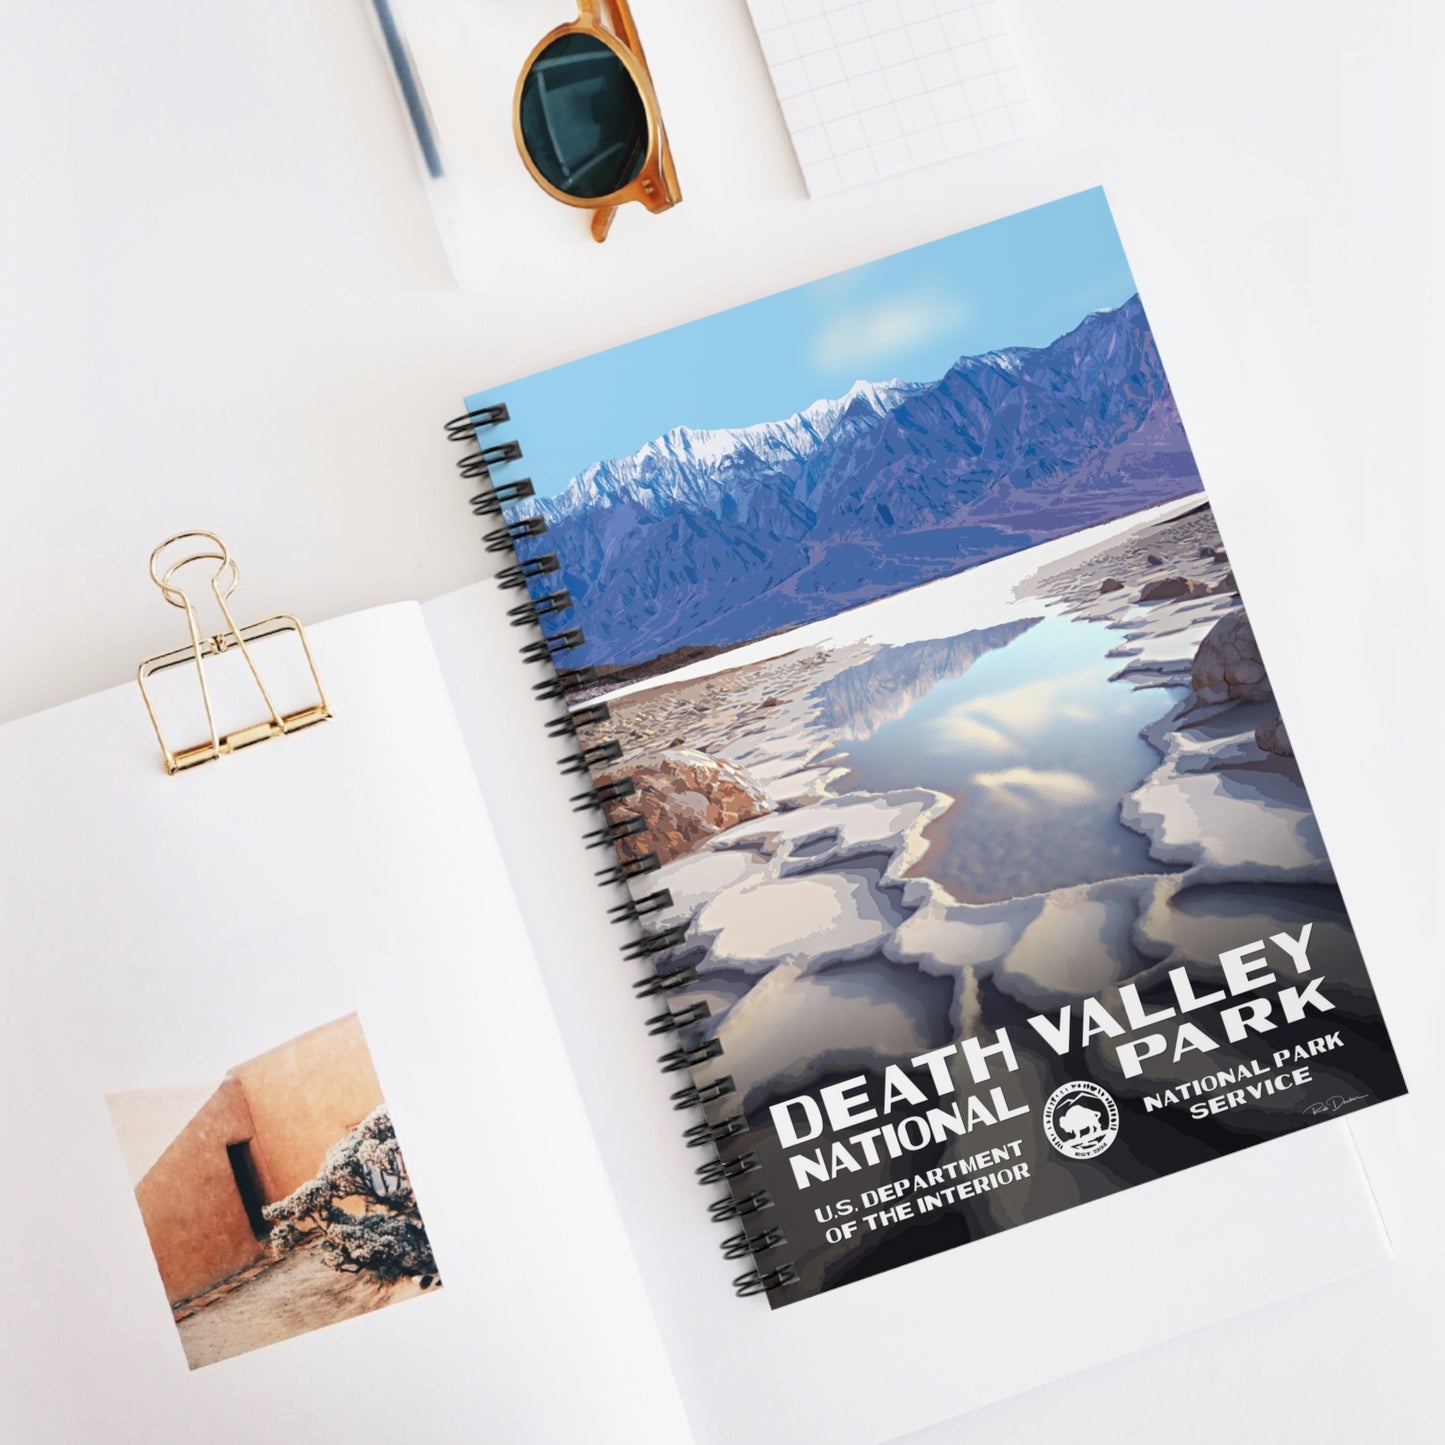 Death Valley National Park (Badwater Basin) Field Journal